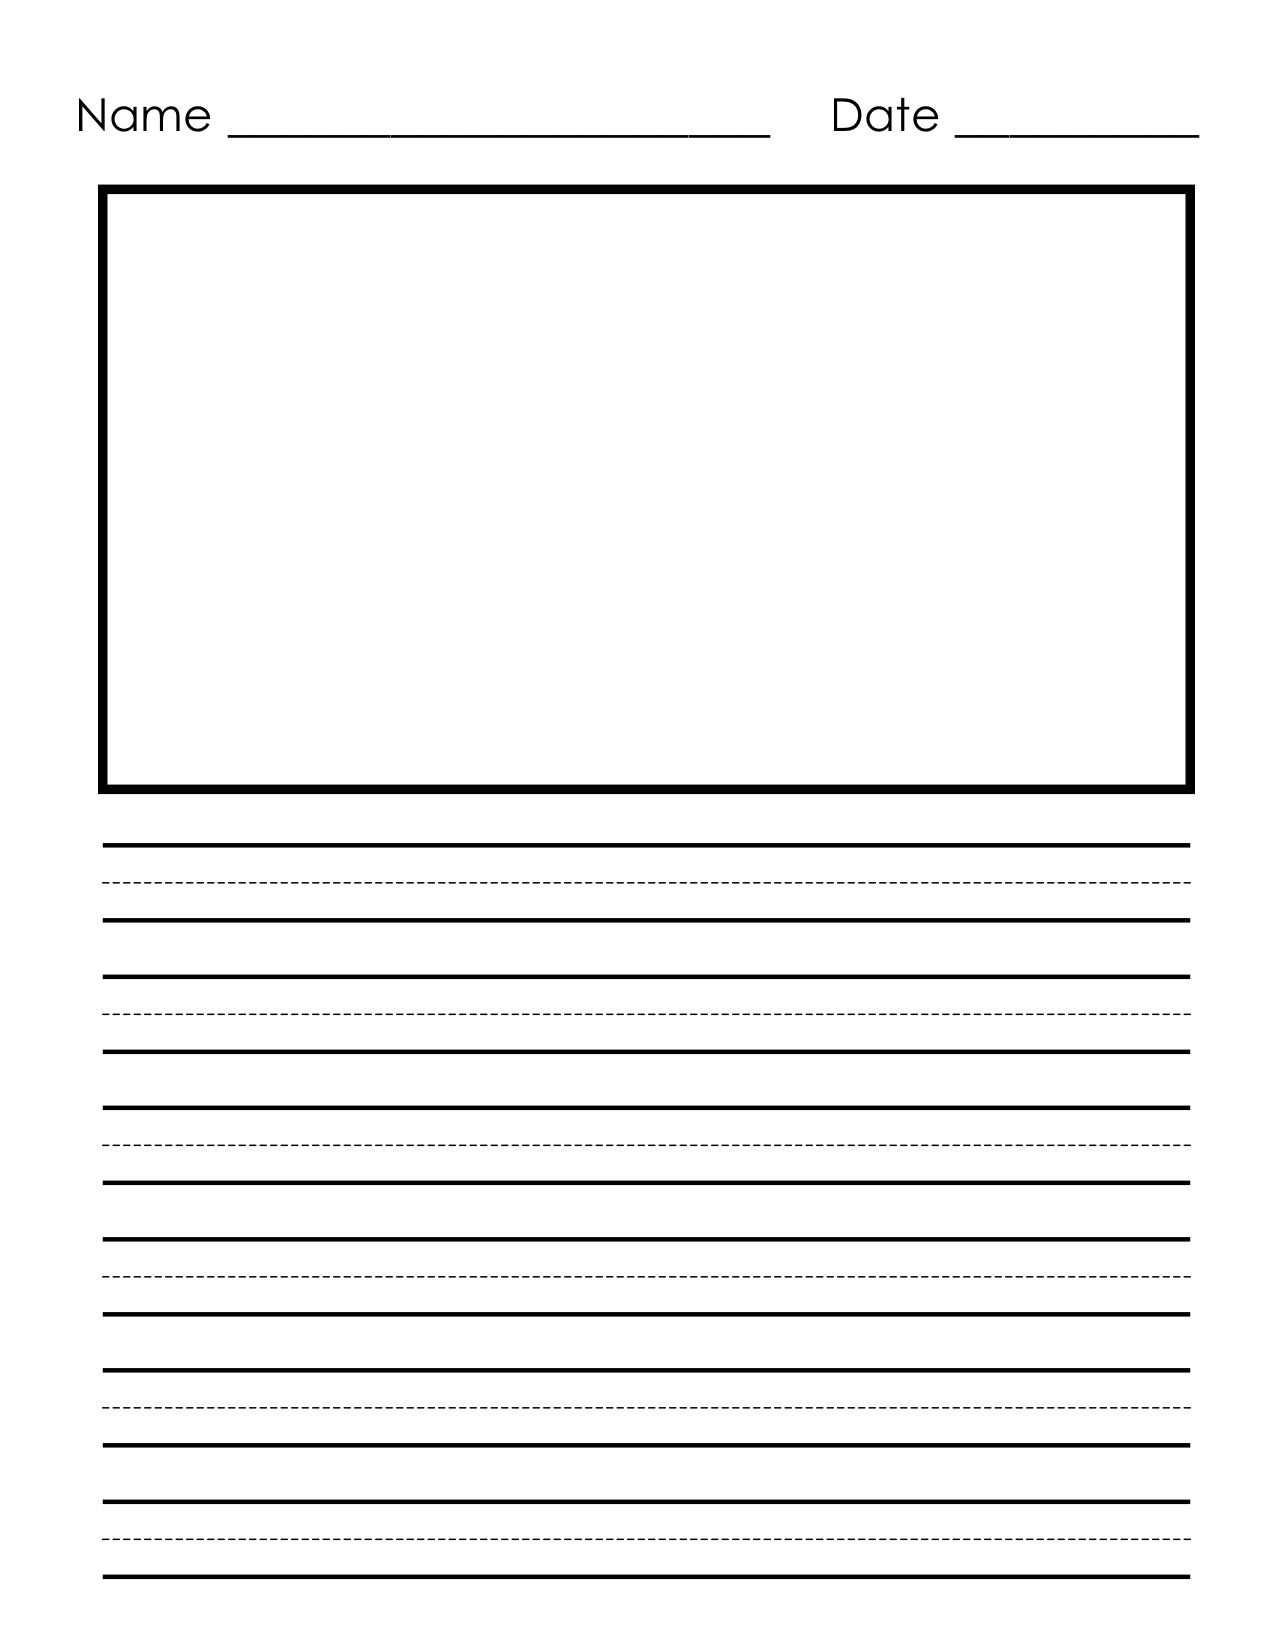 10 Primary Letter Writing Paper | Business Letter Throughout Blank Letter Writing Template For Kids